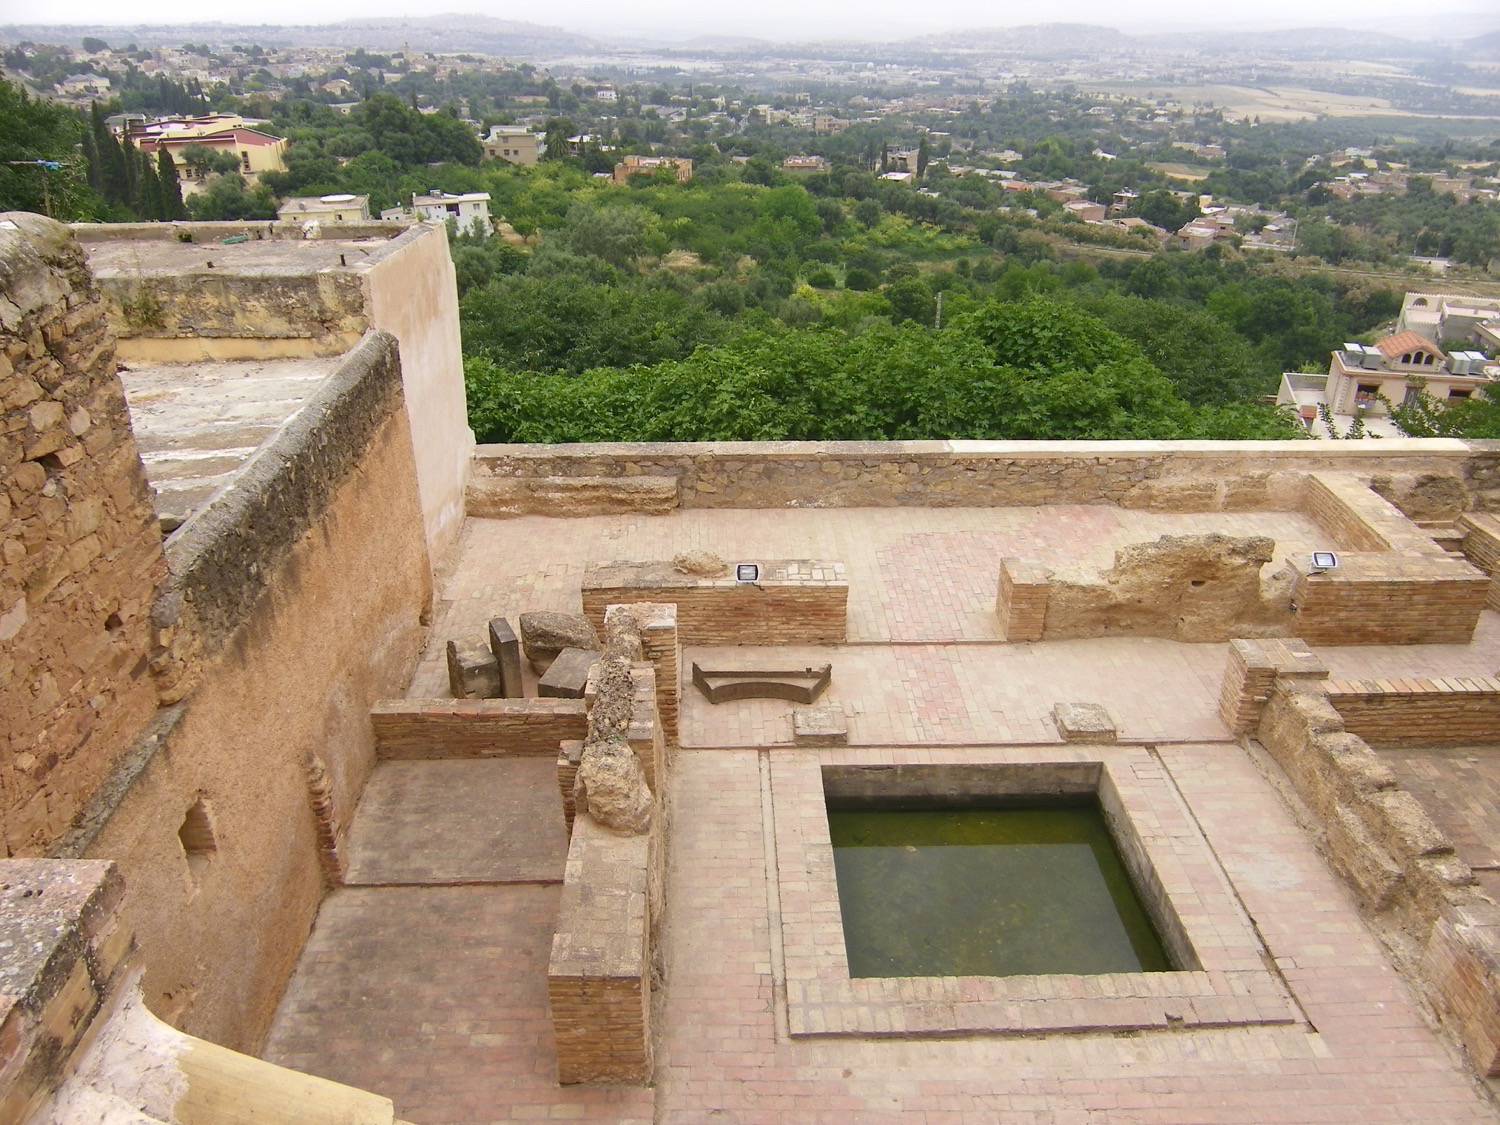 View from above of the courtyard basin